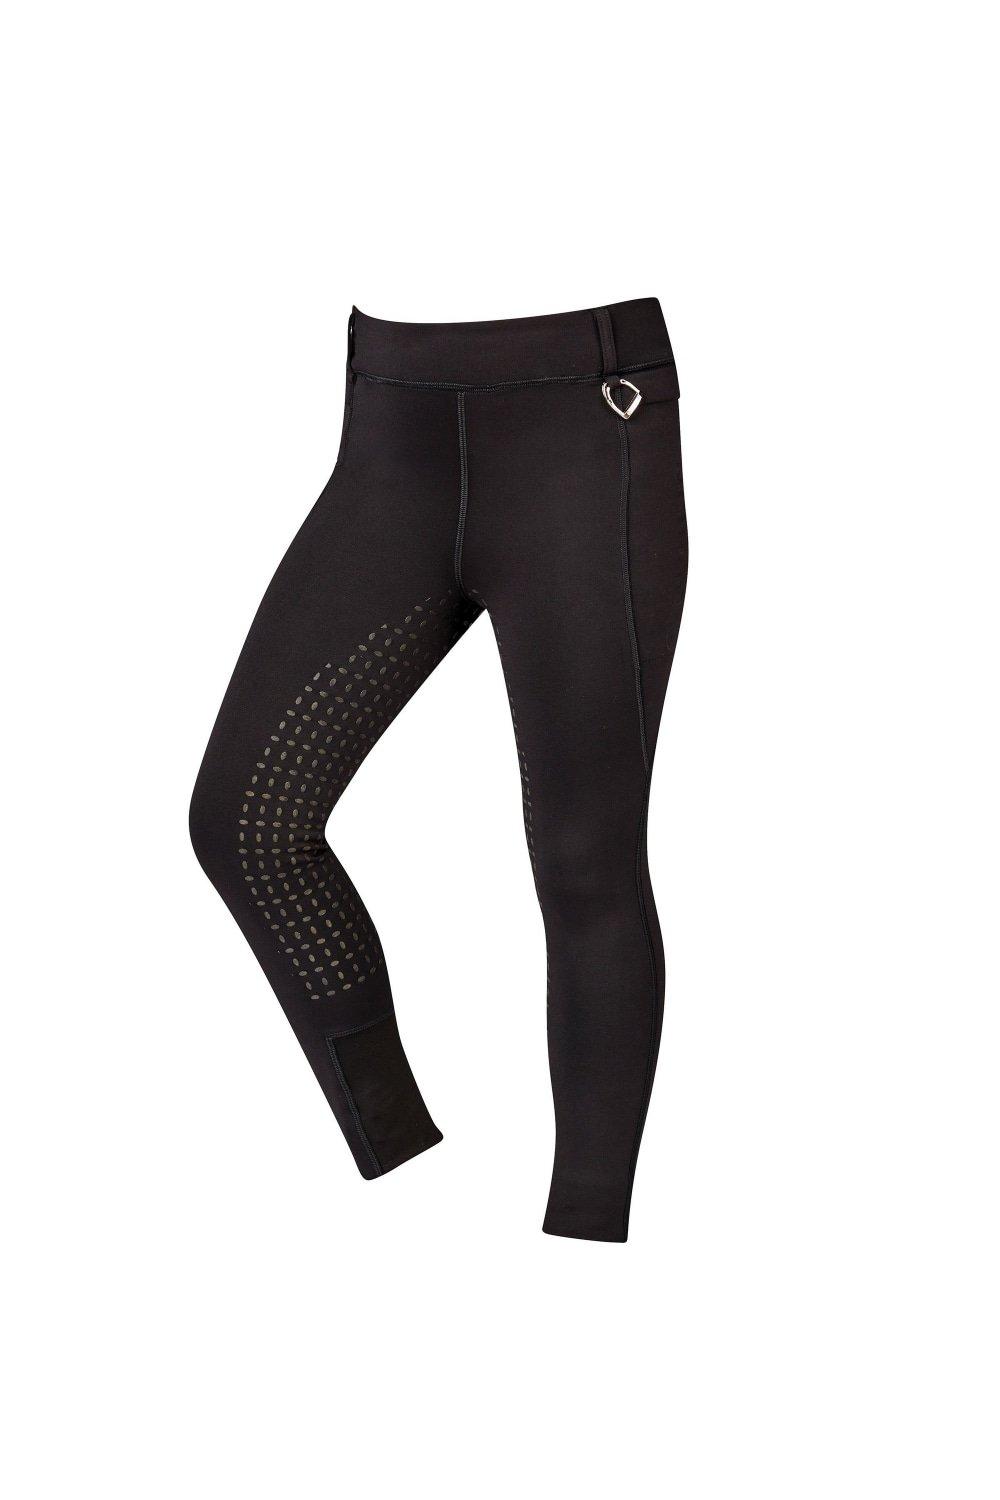 Trousers & Joggers, Warm It Thermodynamic Horse Riding Tights